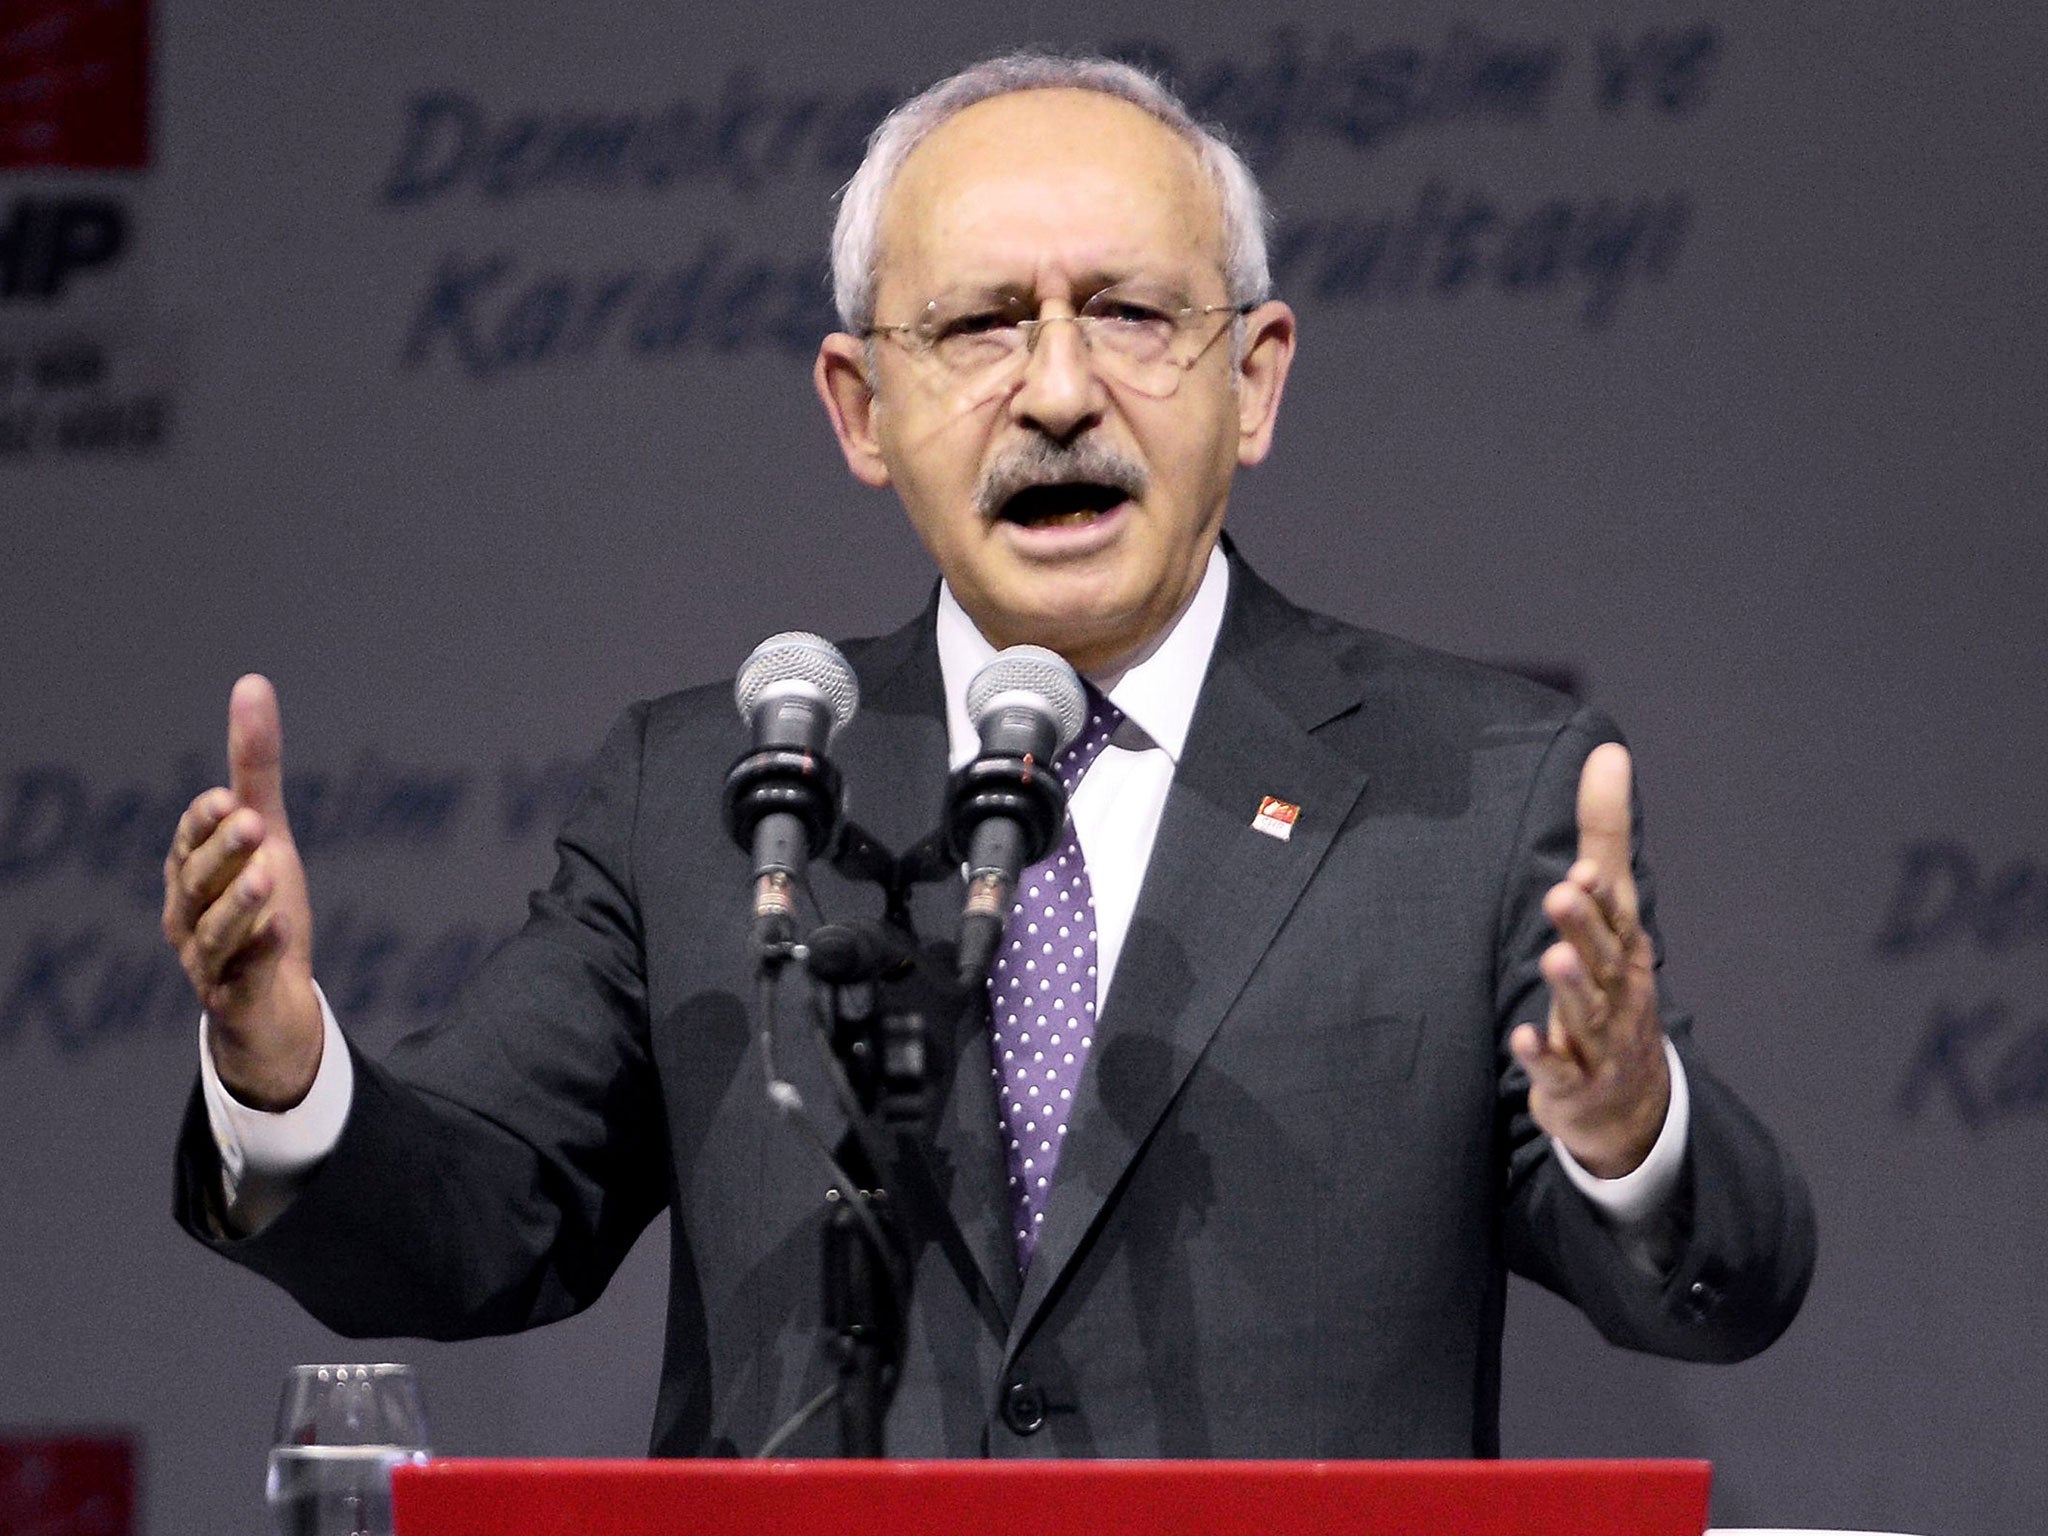 Kemal Kilicdaroglu, the main opposition leader, is accused of “openly insulting the President”